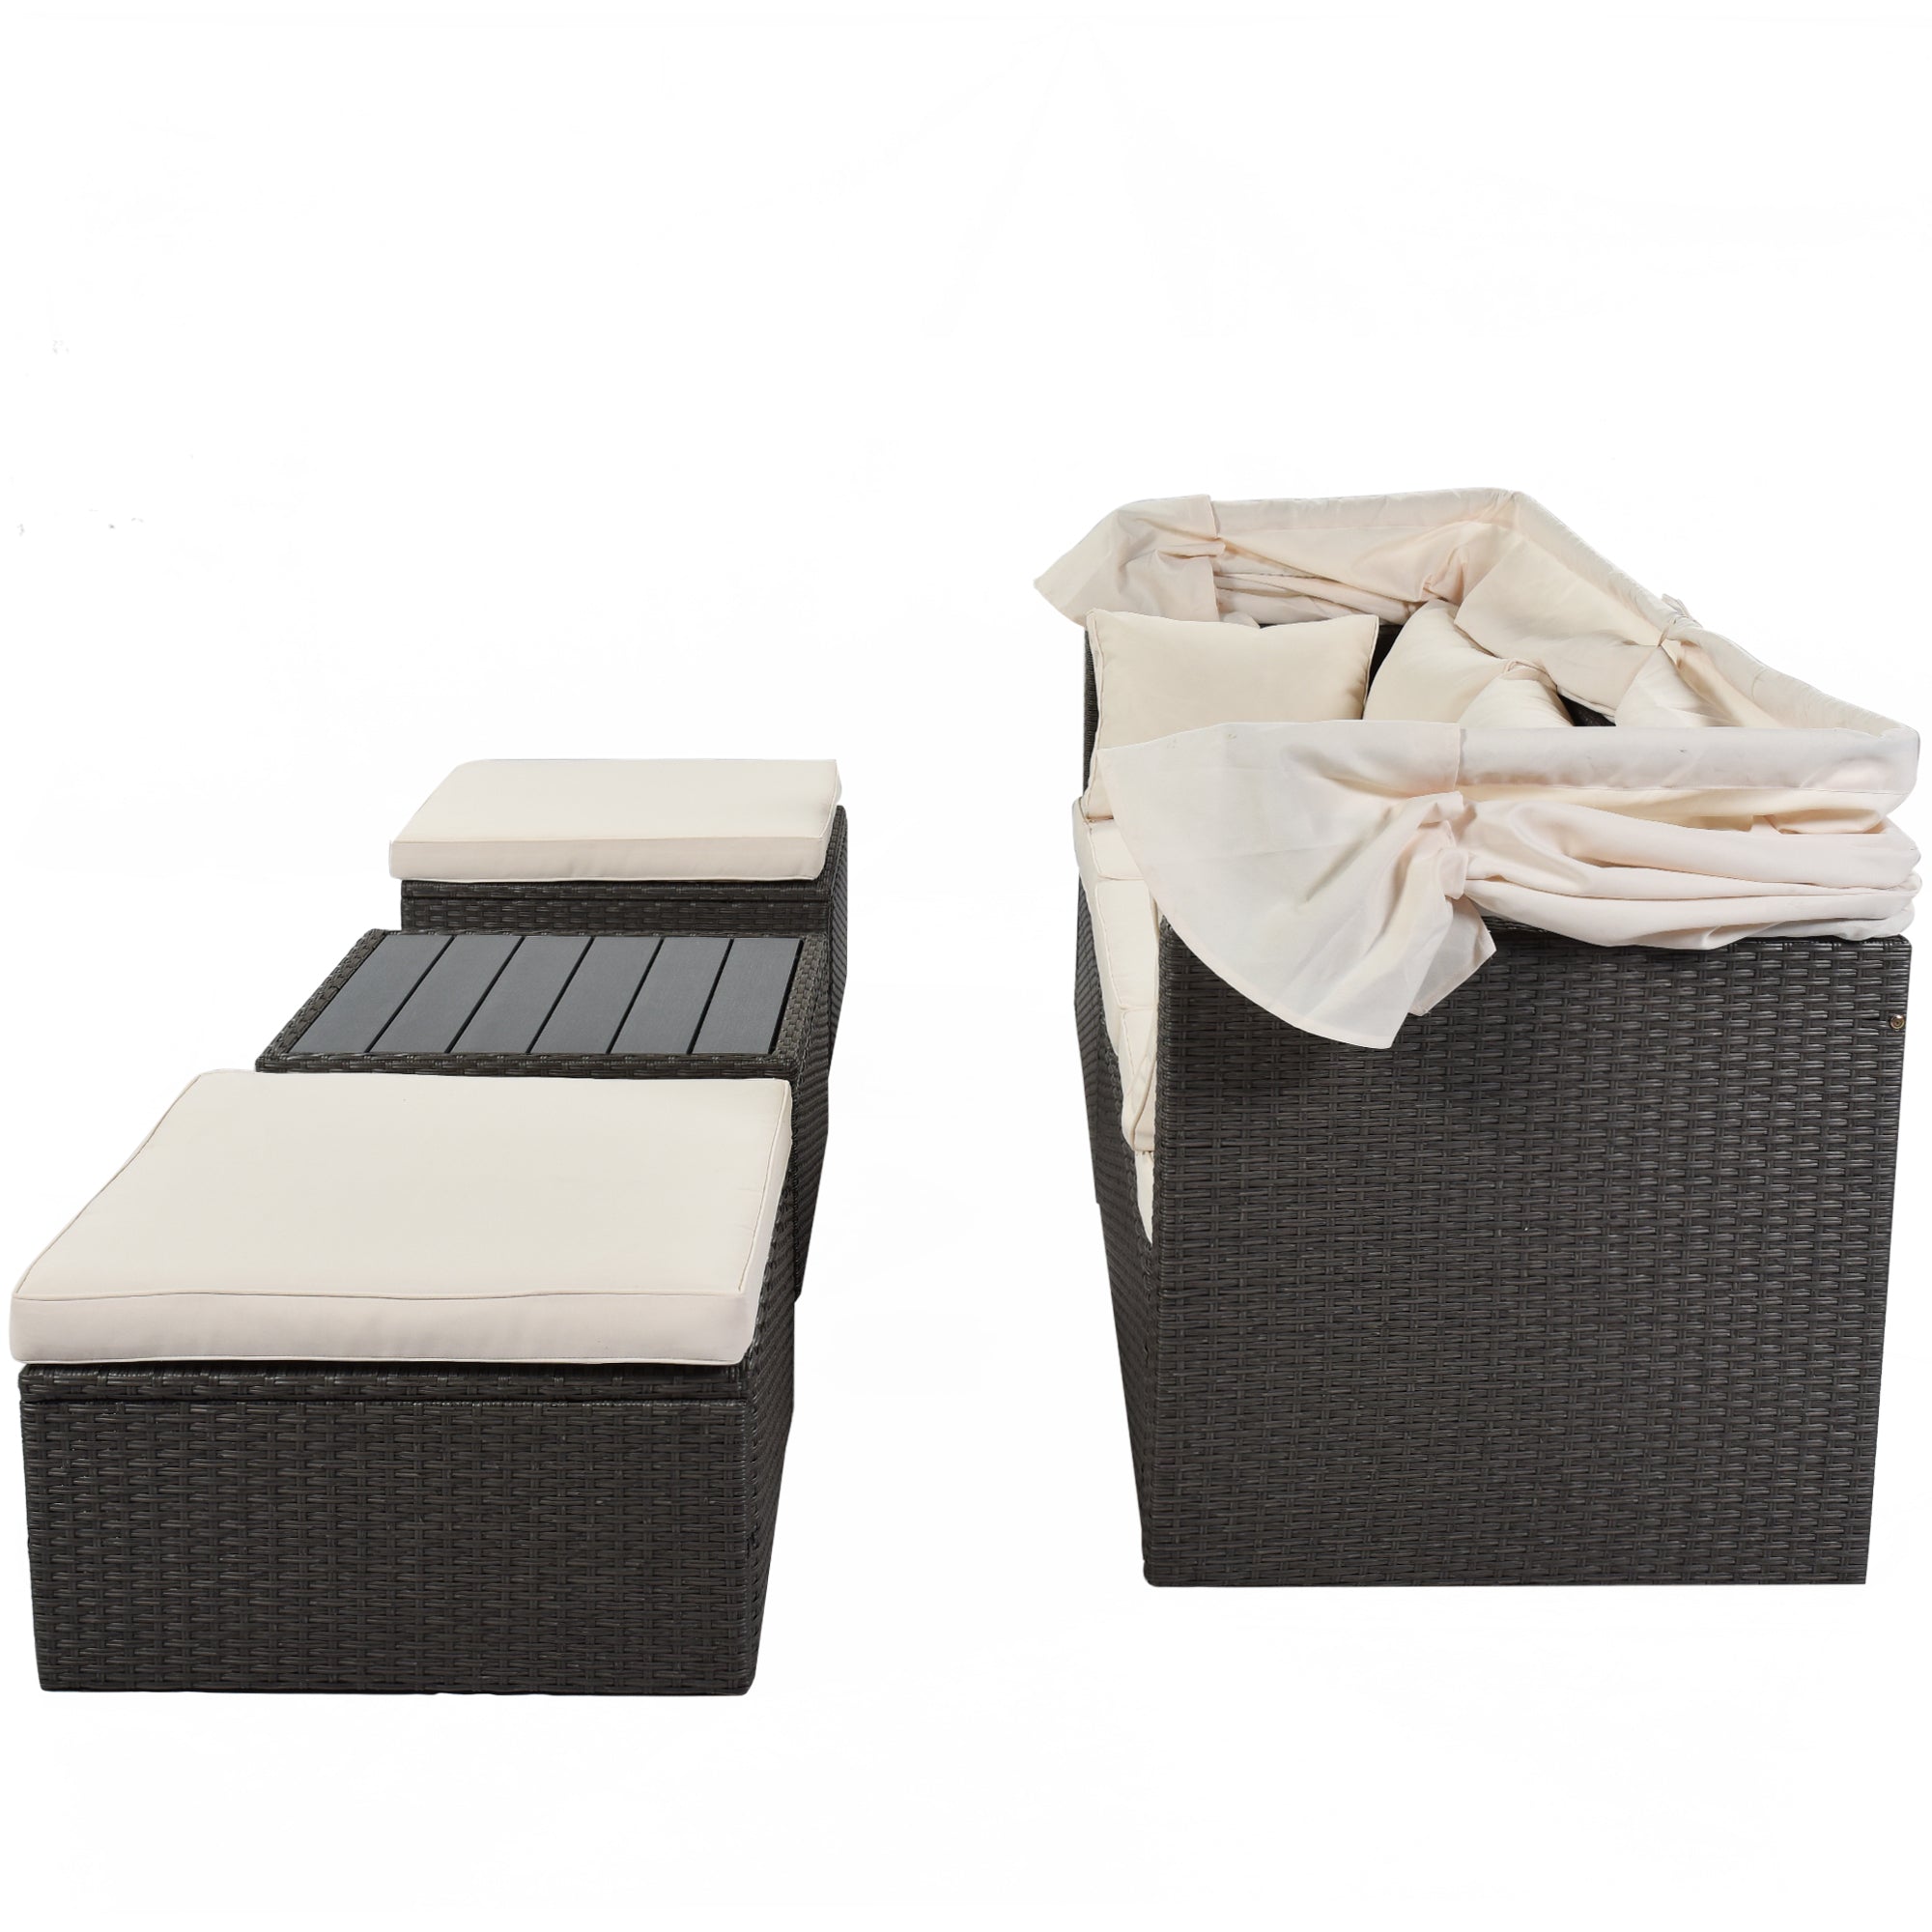 U Style Outdoor Patio Rectangle Daybed with beige-rattan